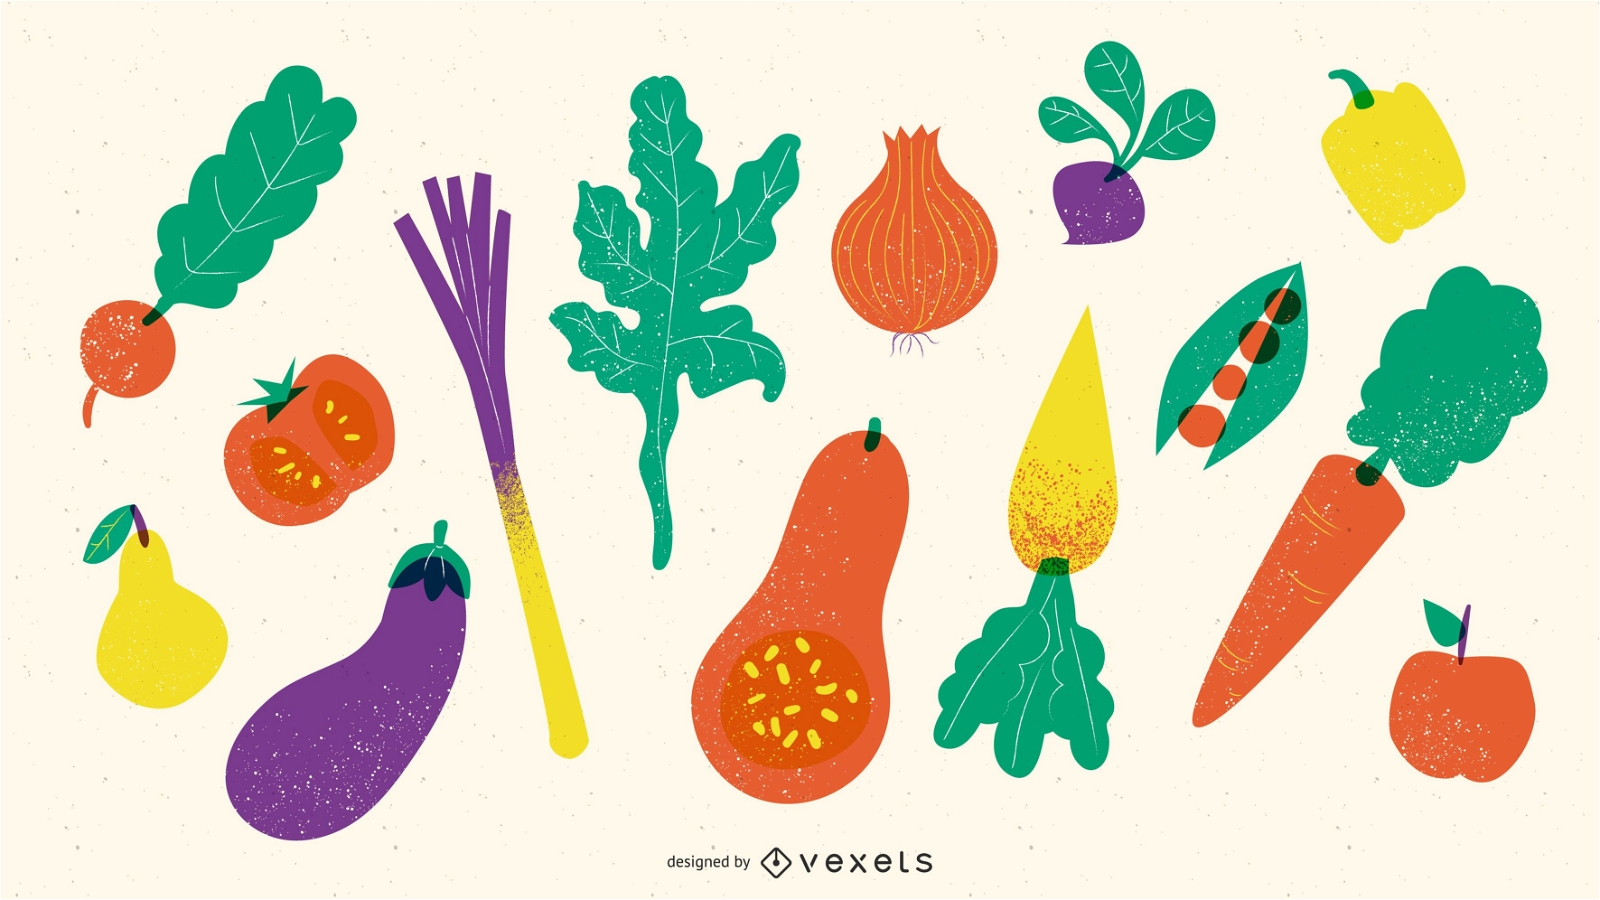 Fruits and vegetables textured pack